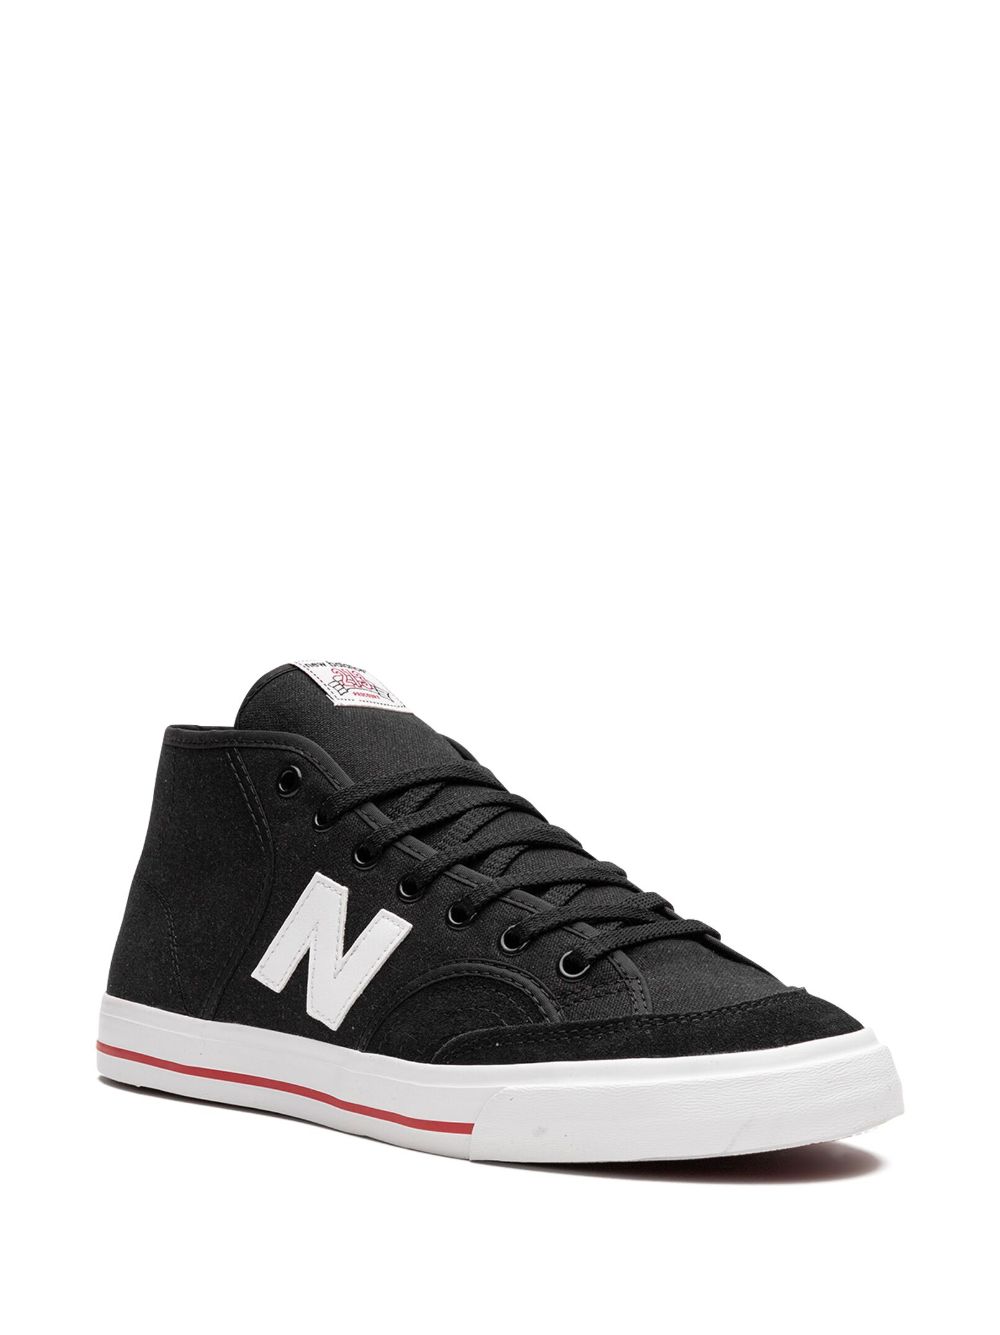 Image 2 of New Balance Pro Court 213 "Black/White" sneakers